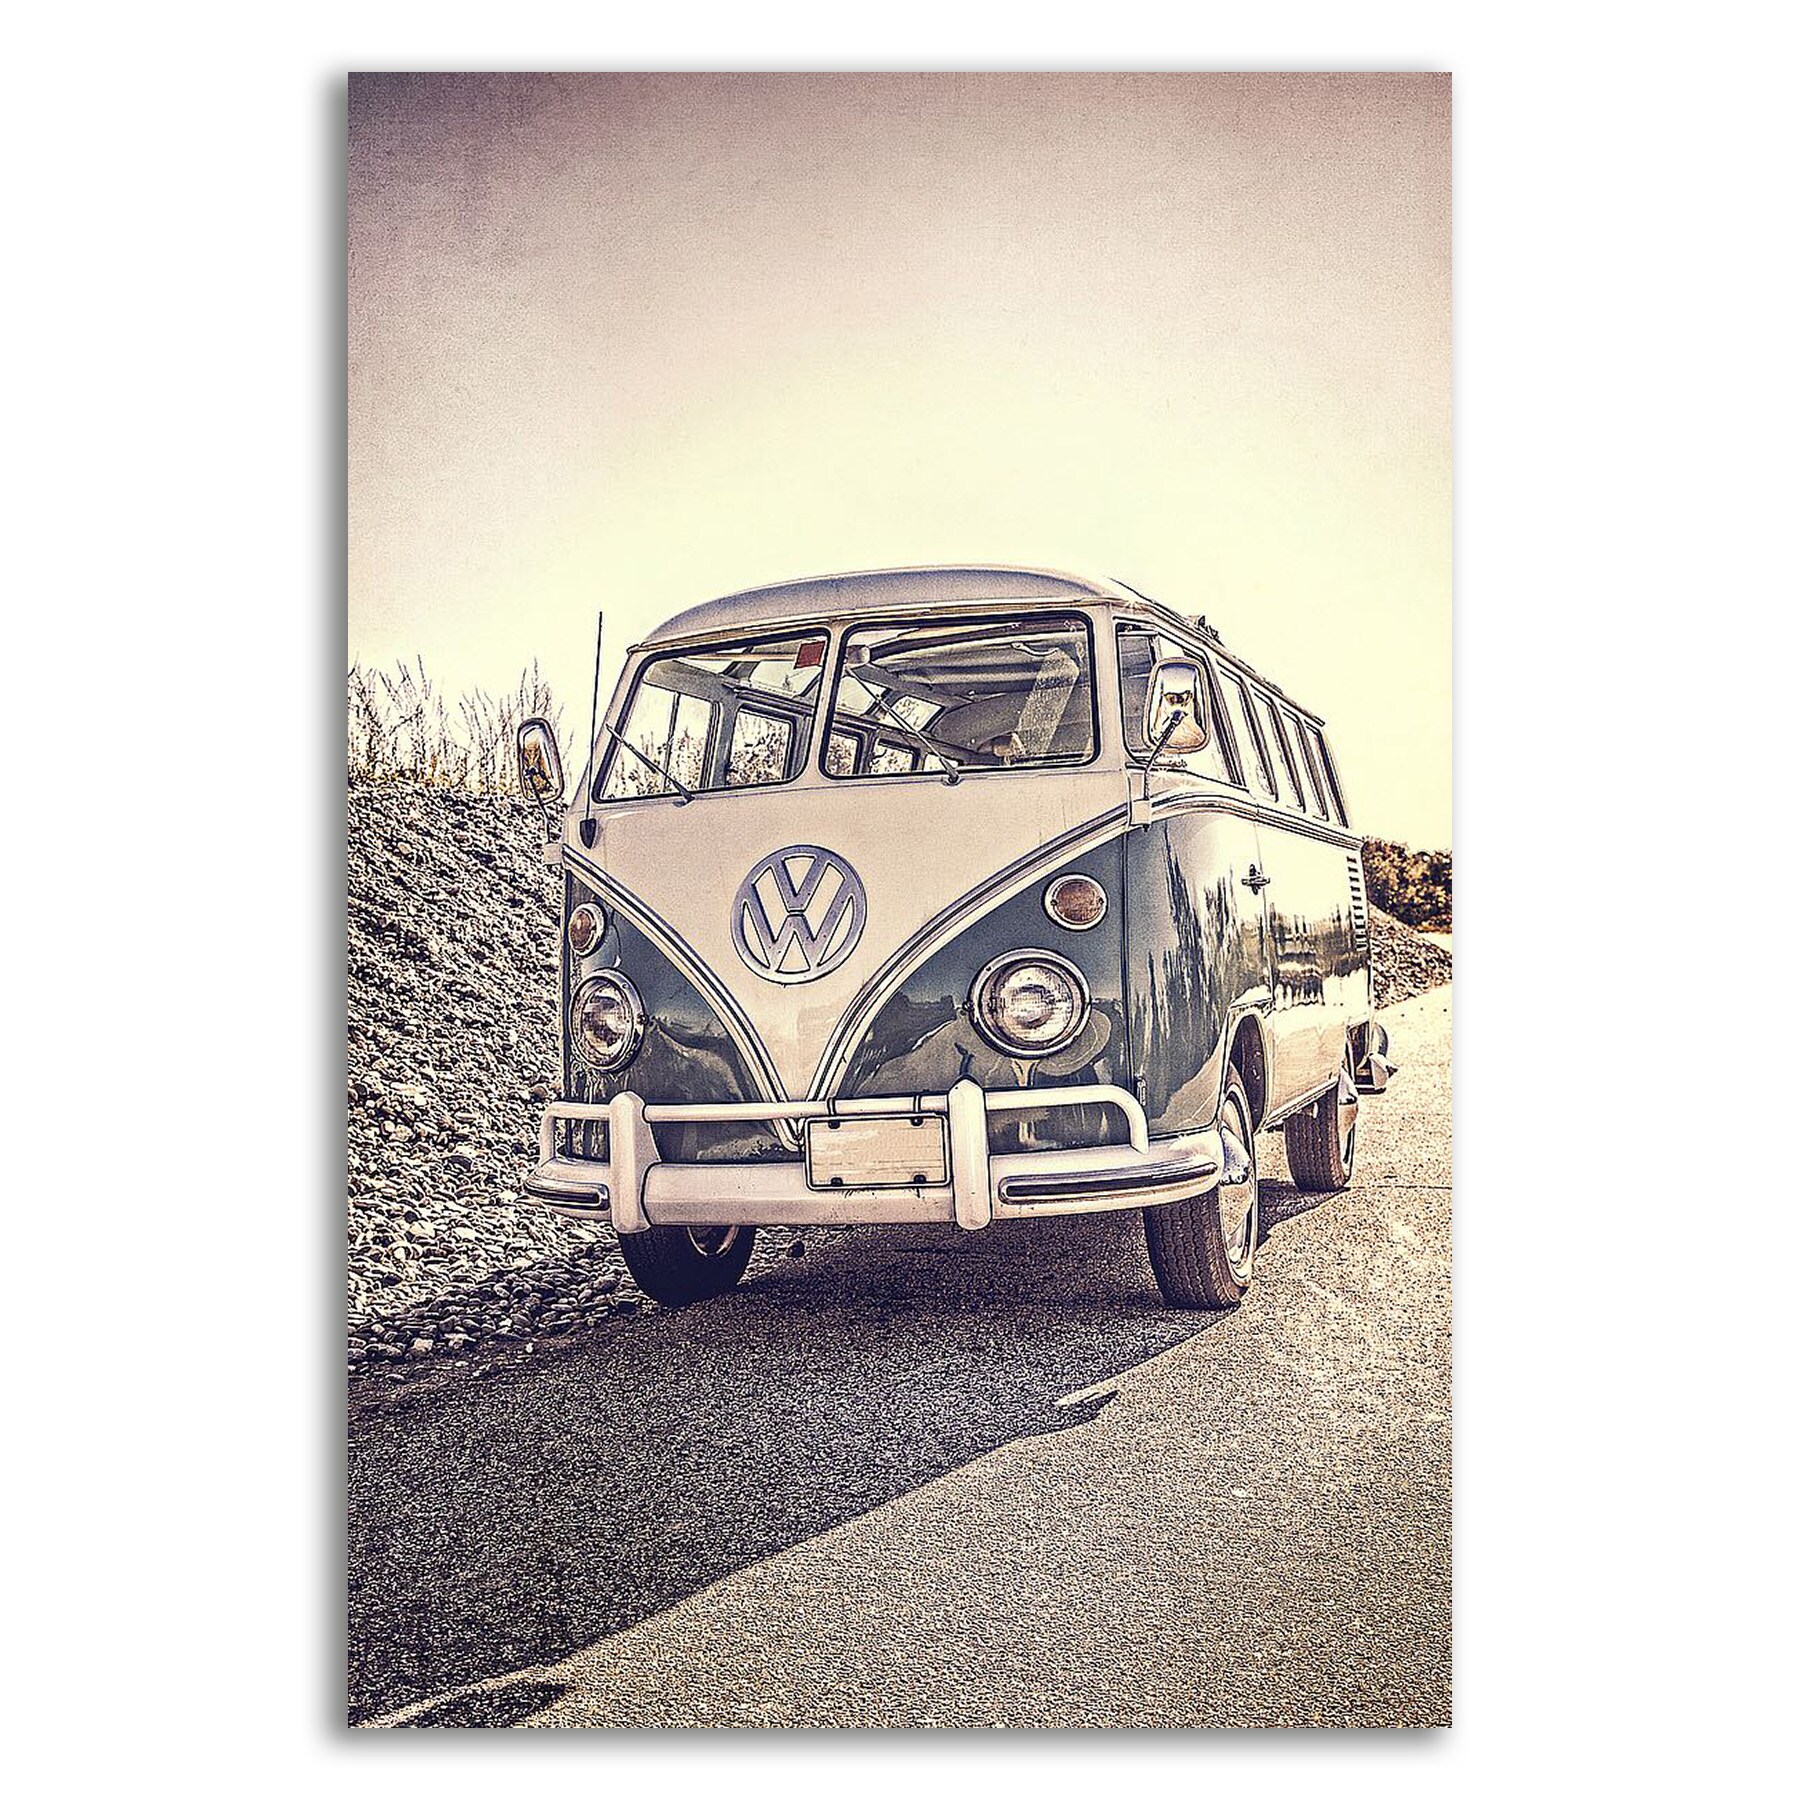 Surf Bus Wooden Blue VW Camper Van Sign Printed Wall Art Decoration With Rope